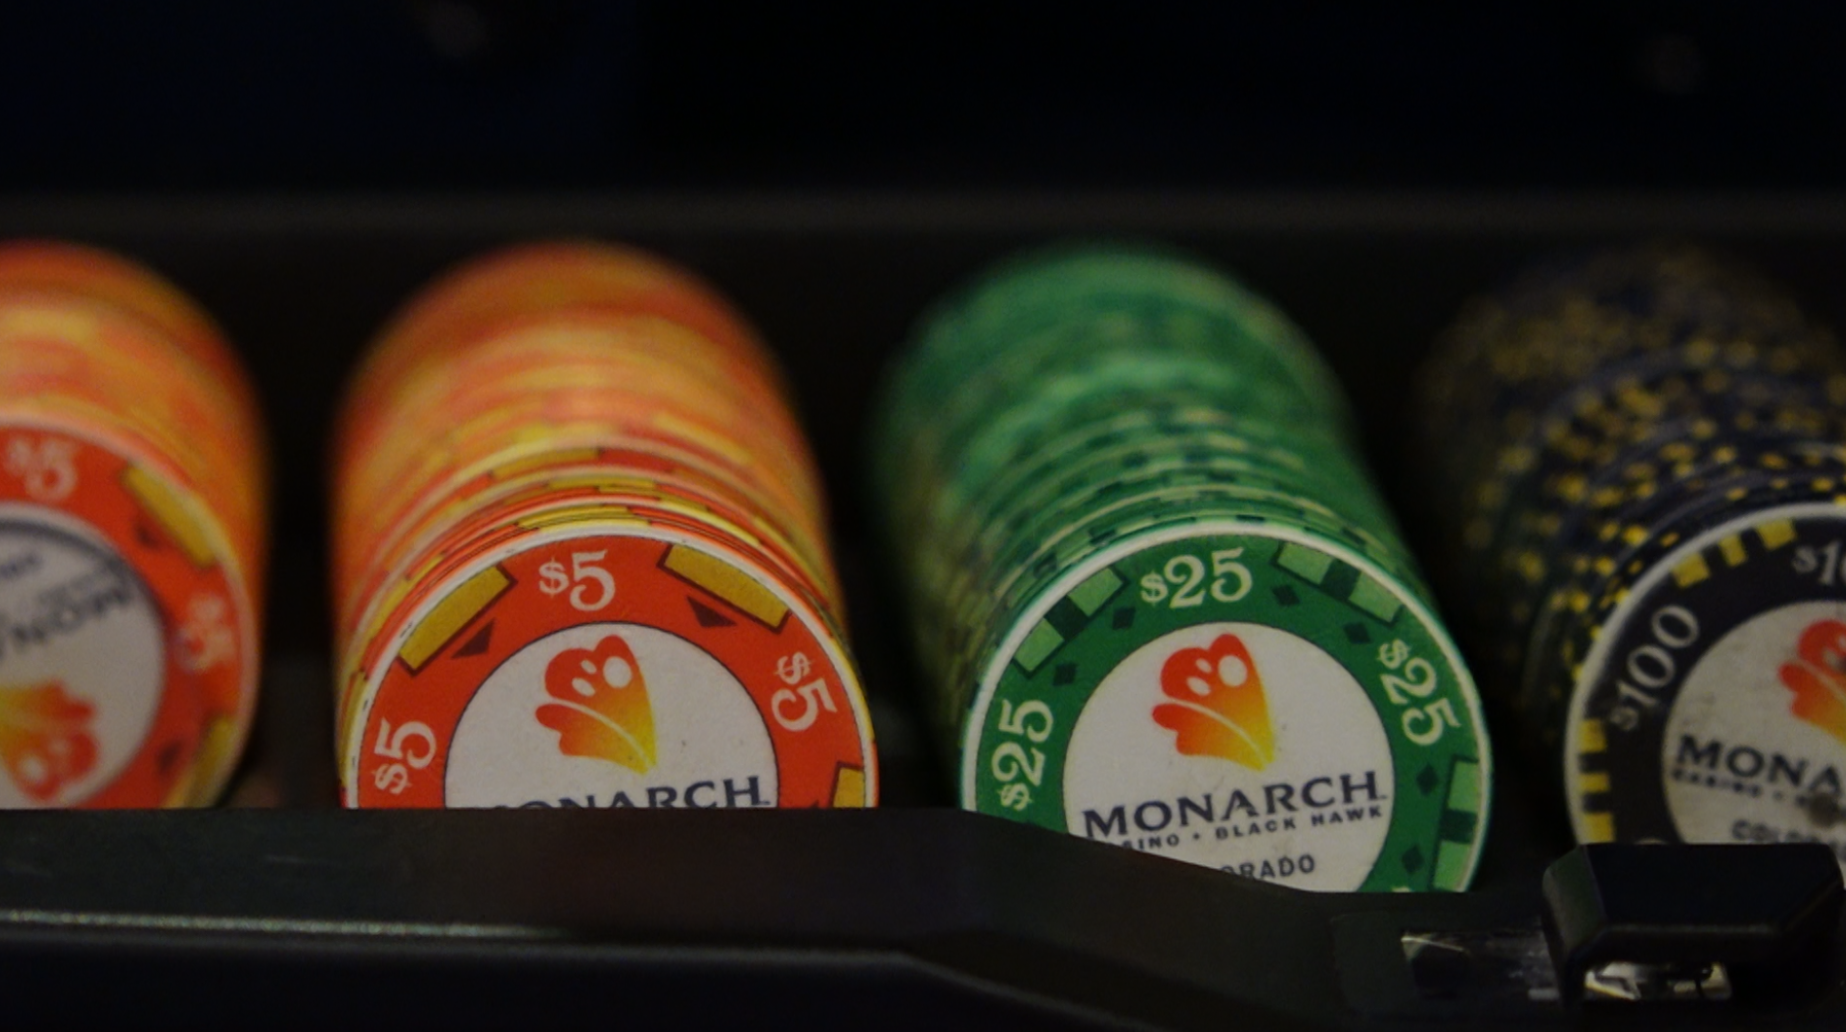 Bet on a great career at Monarch Casino Resort Spa! Monarch Casino Resort Spa offers excellent benefits, generous tuition reimbursement, advancement opportunities, and flexible work schedules, among other great perks. Text “MONARCH” to 97211 or go to jobs.monarchblackhawk.com for more information.
